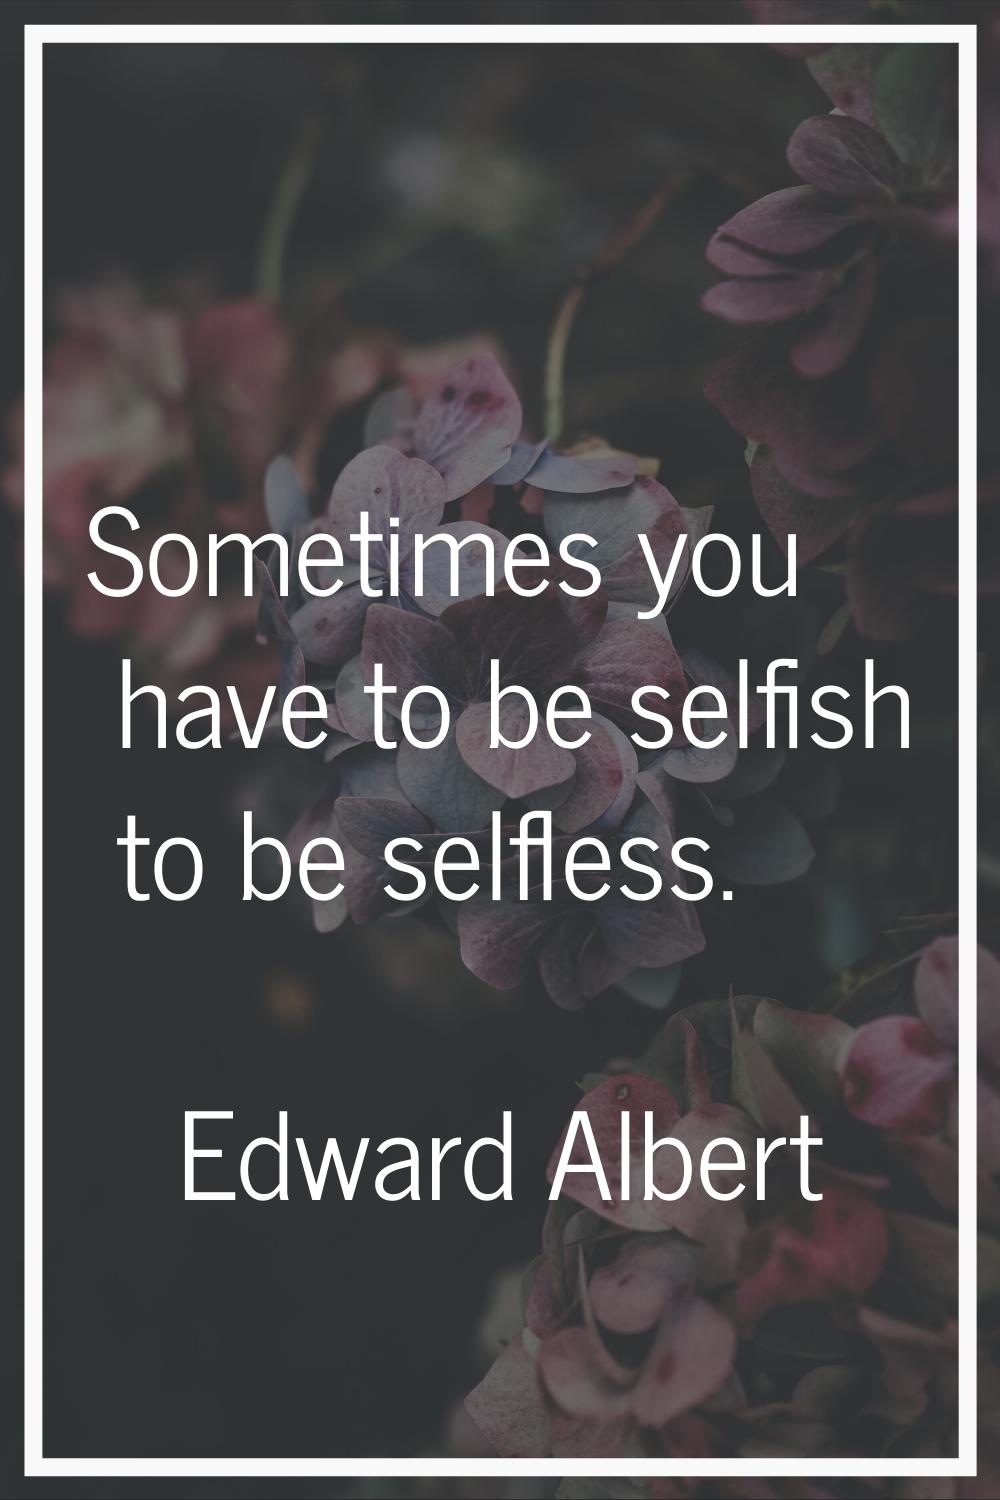 Sometimes you have to be selfish to be selfless.